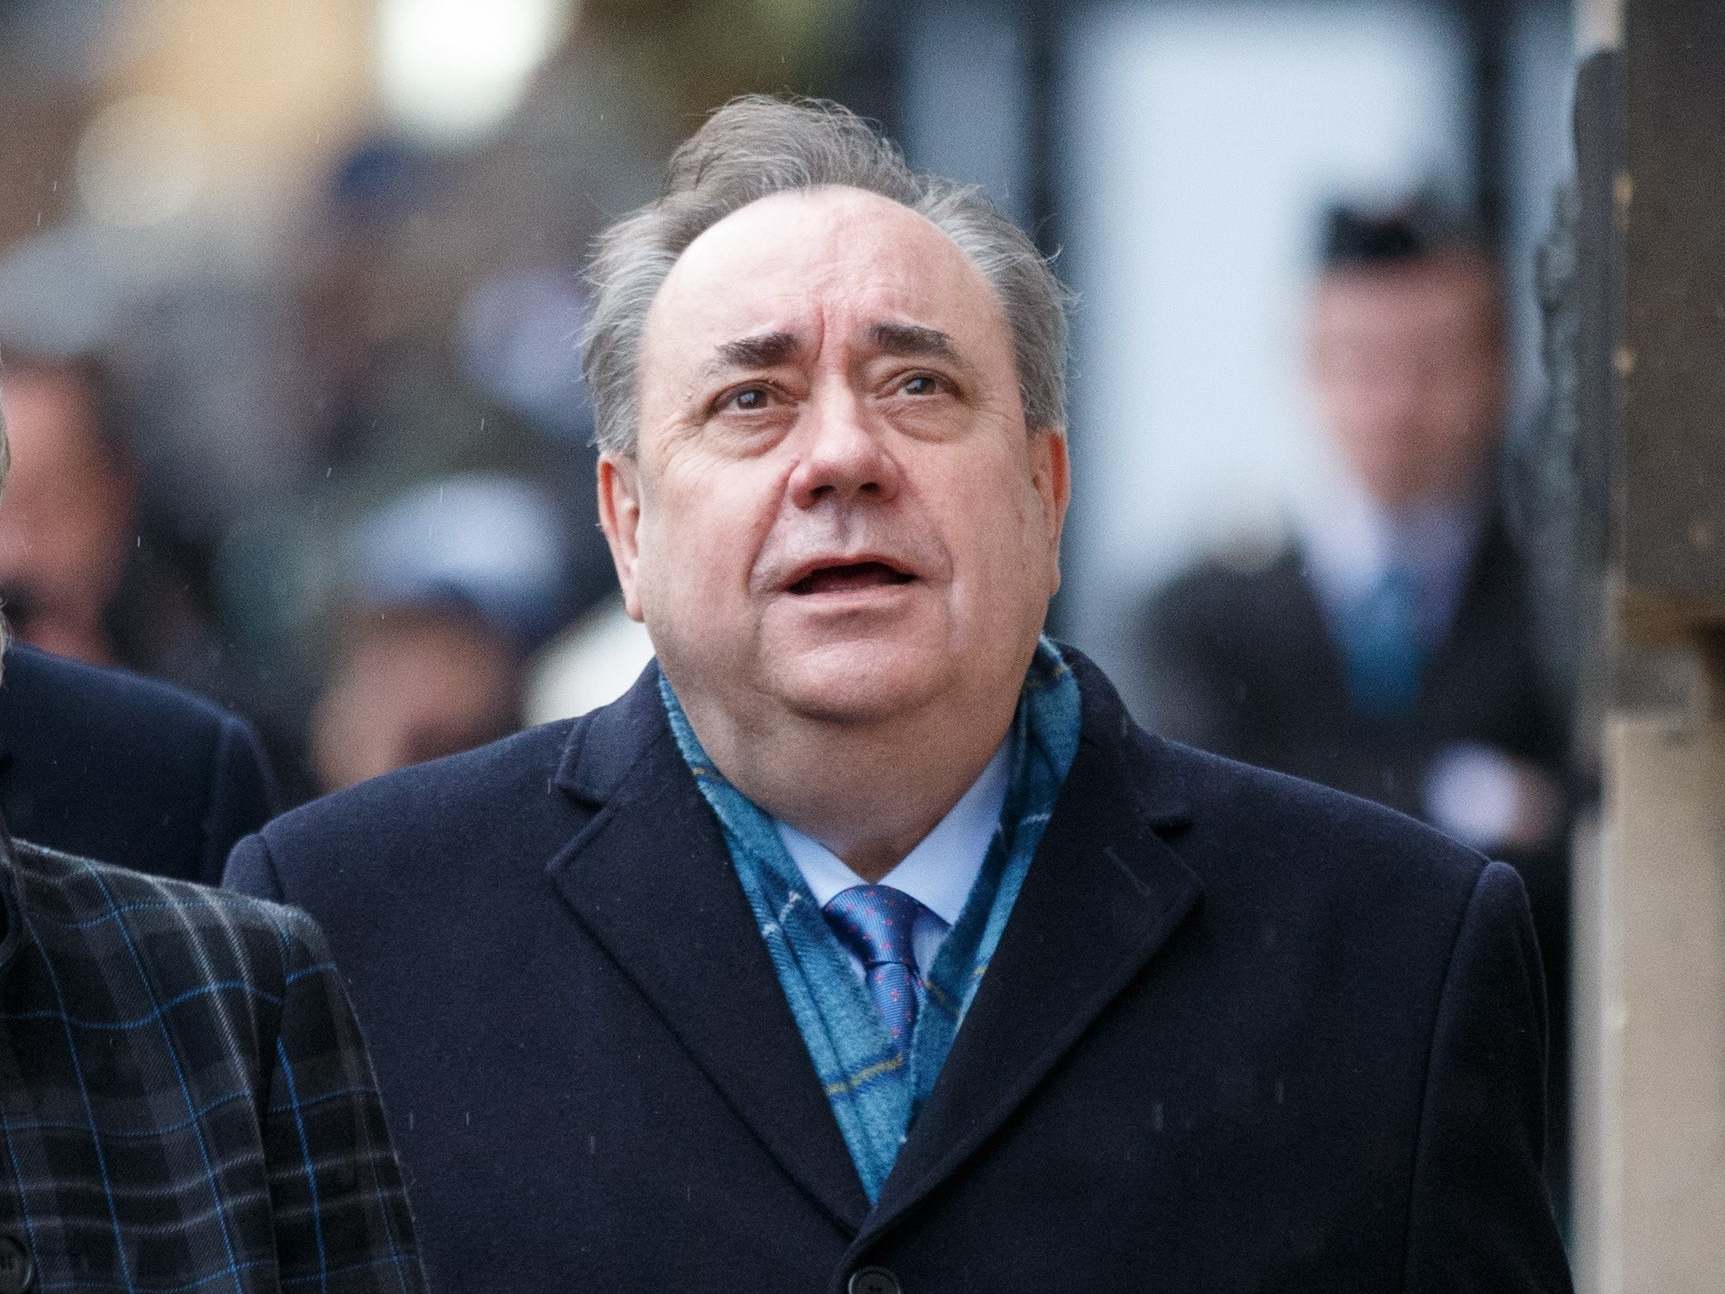 Alex Salmond was acquitted of all 13 rape and sexual assault charges